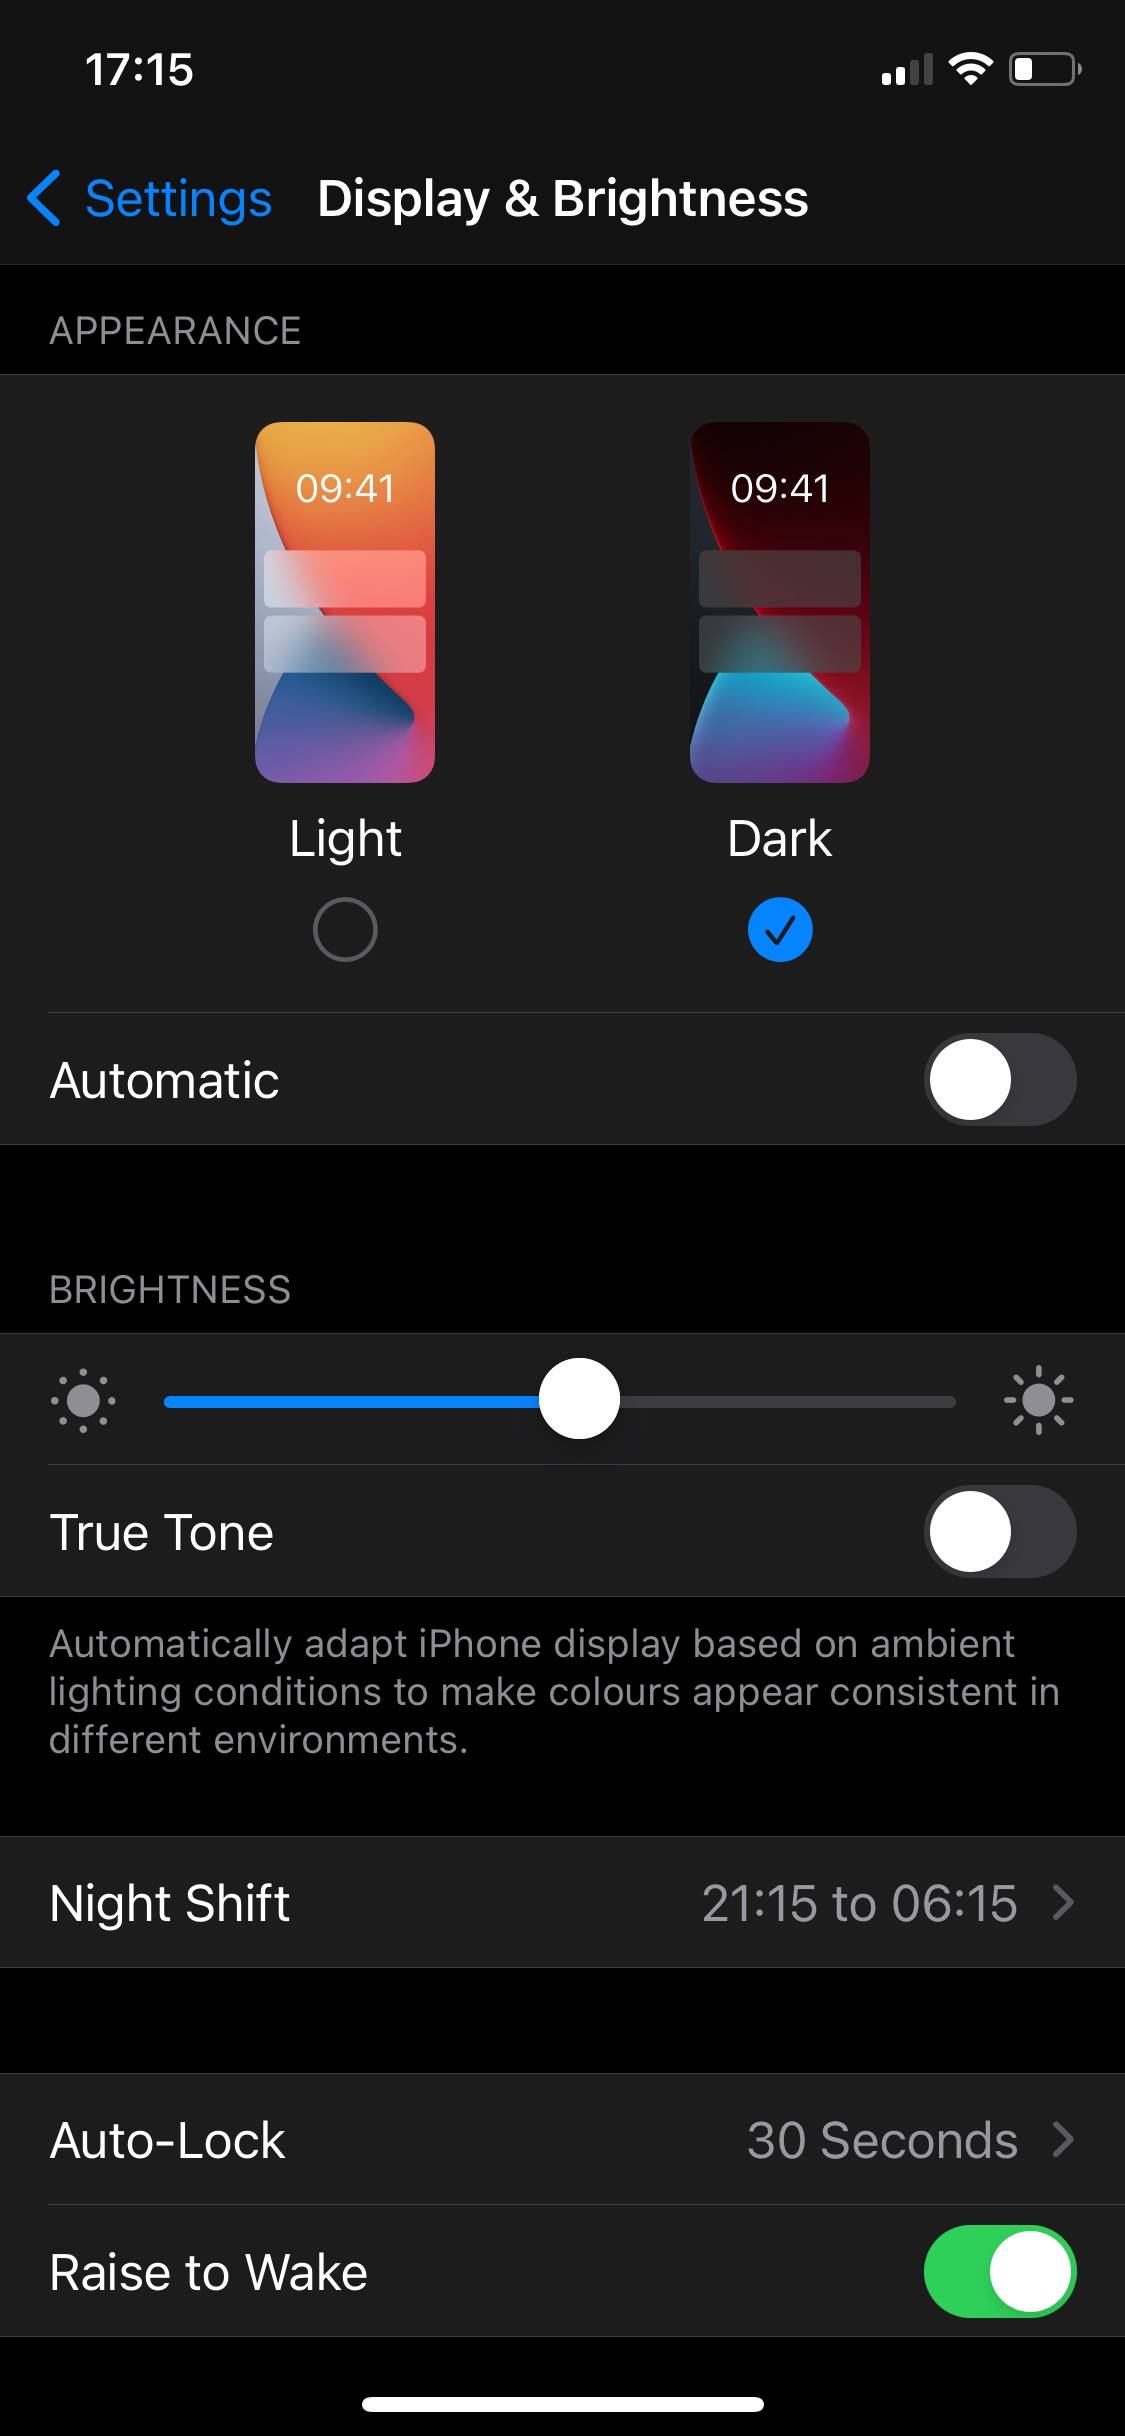 iOS Display & Brightness settings page showing True Tone turned off